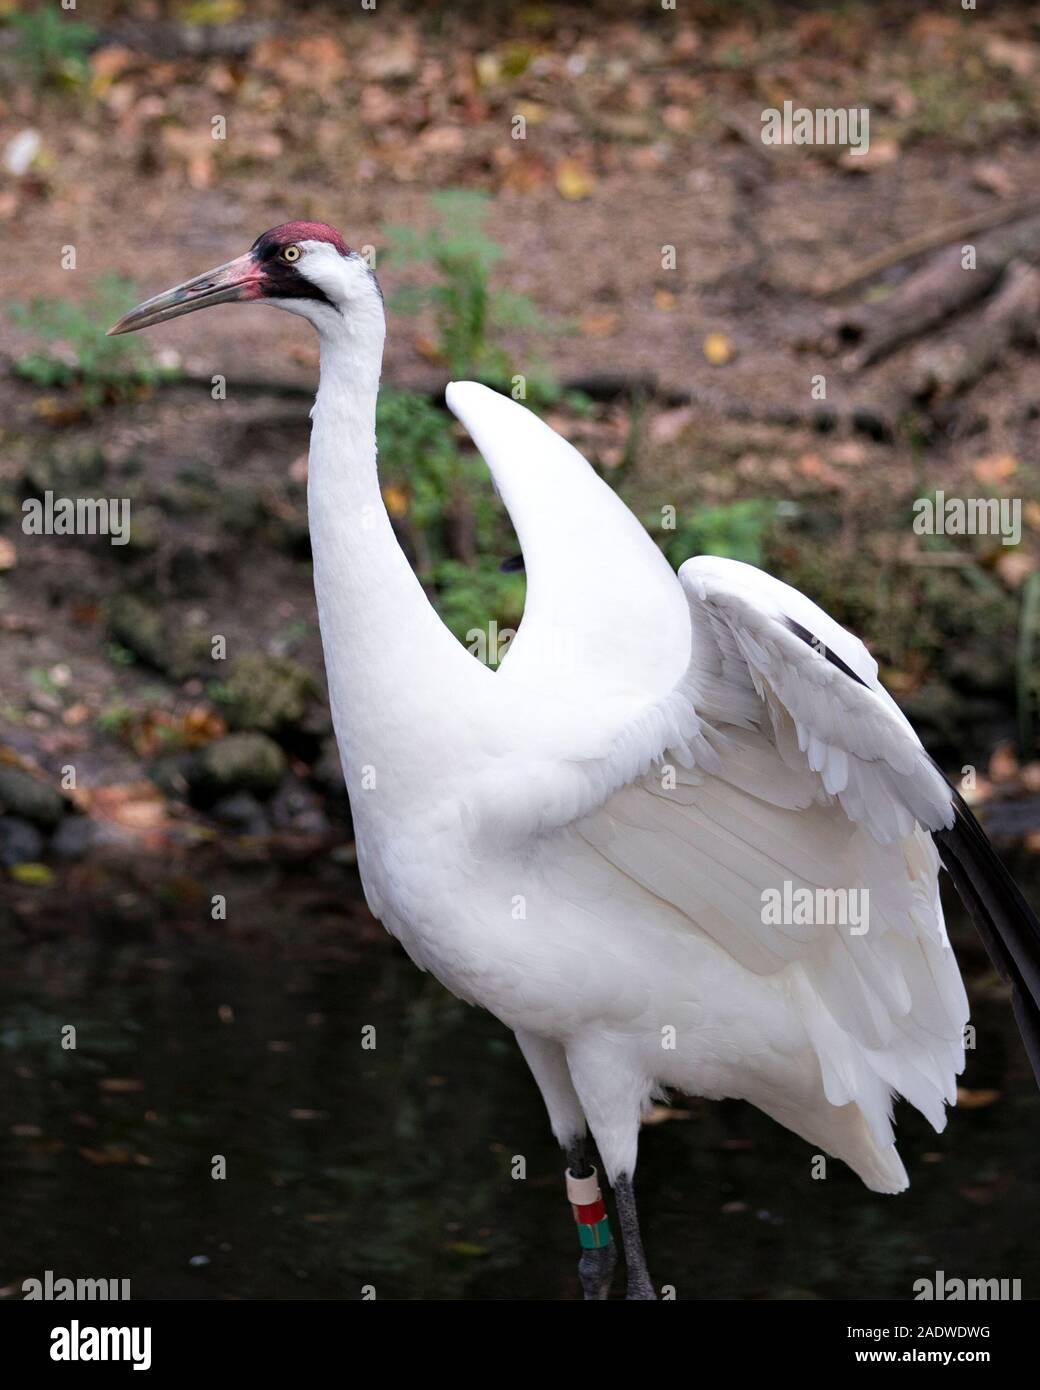 Whopping Crane bird close-up profile view with spread wings with background exposing its red crown on its head, eye, beak in its surrounding. Stock Photo